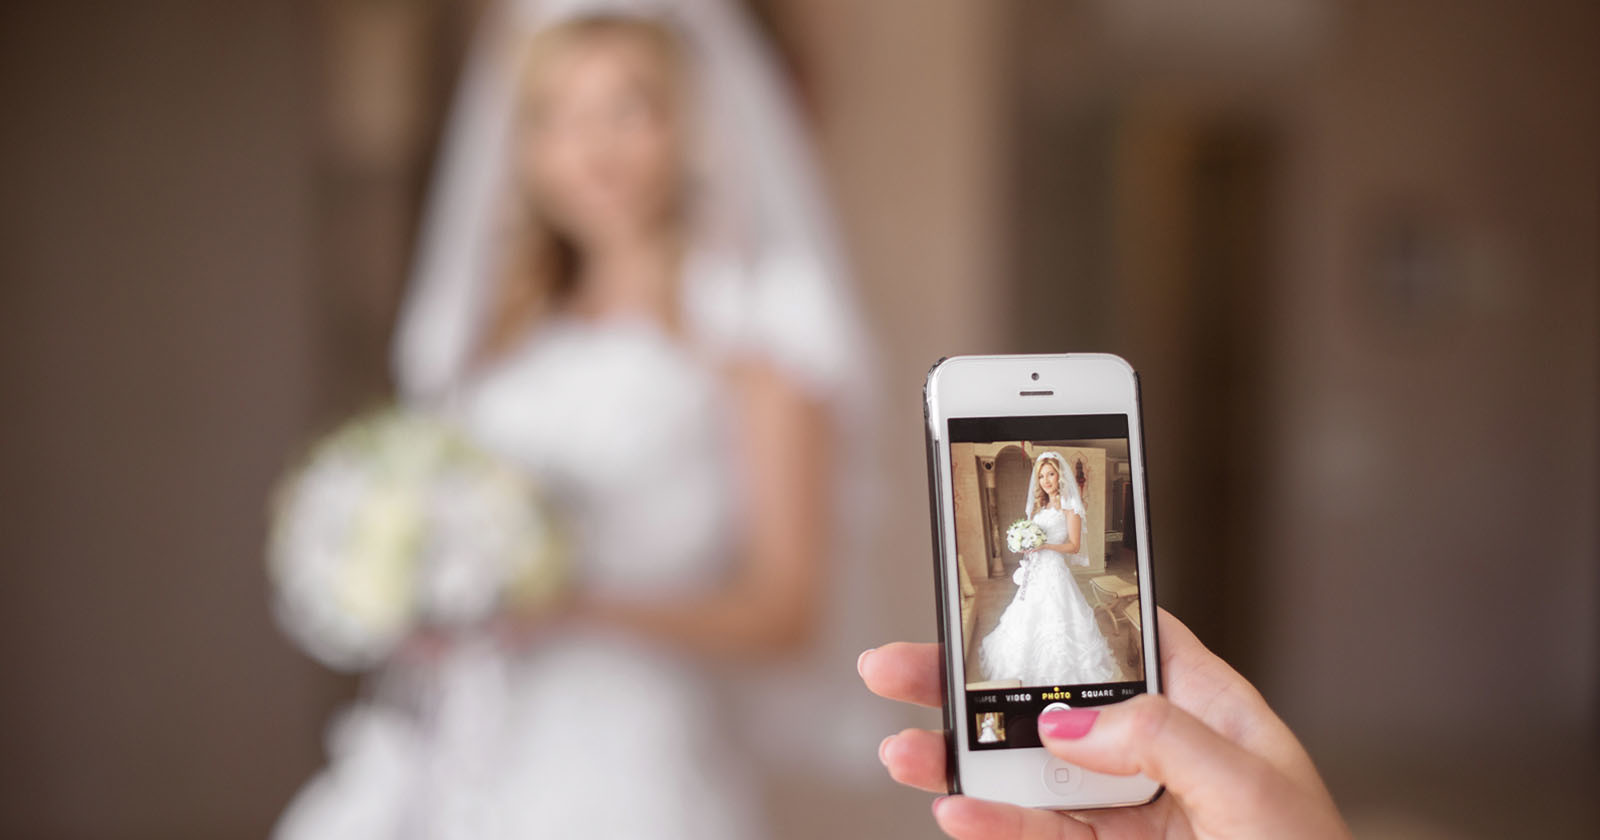 Couples Are Hiring TikTok Creators to Avoid Waiting Weeks for Professional Wedding Photos